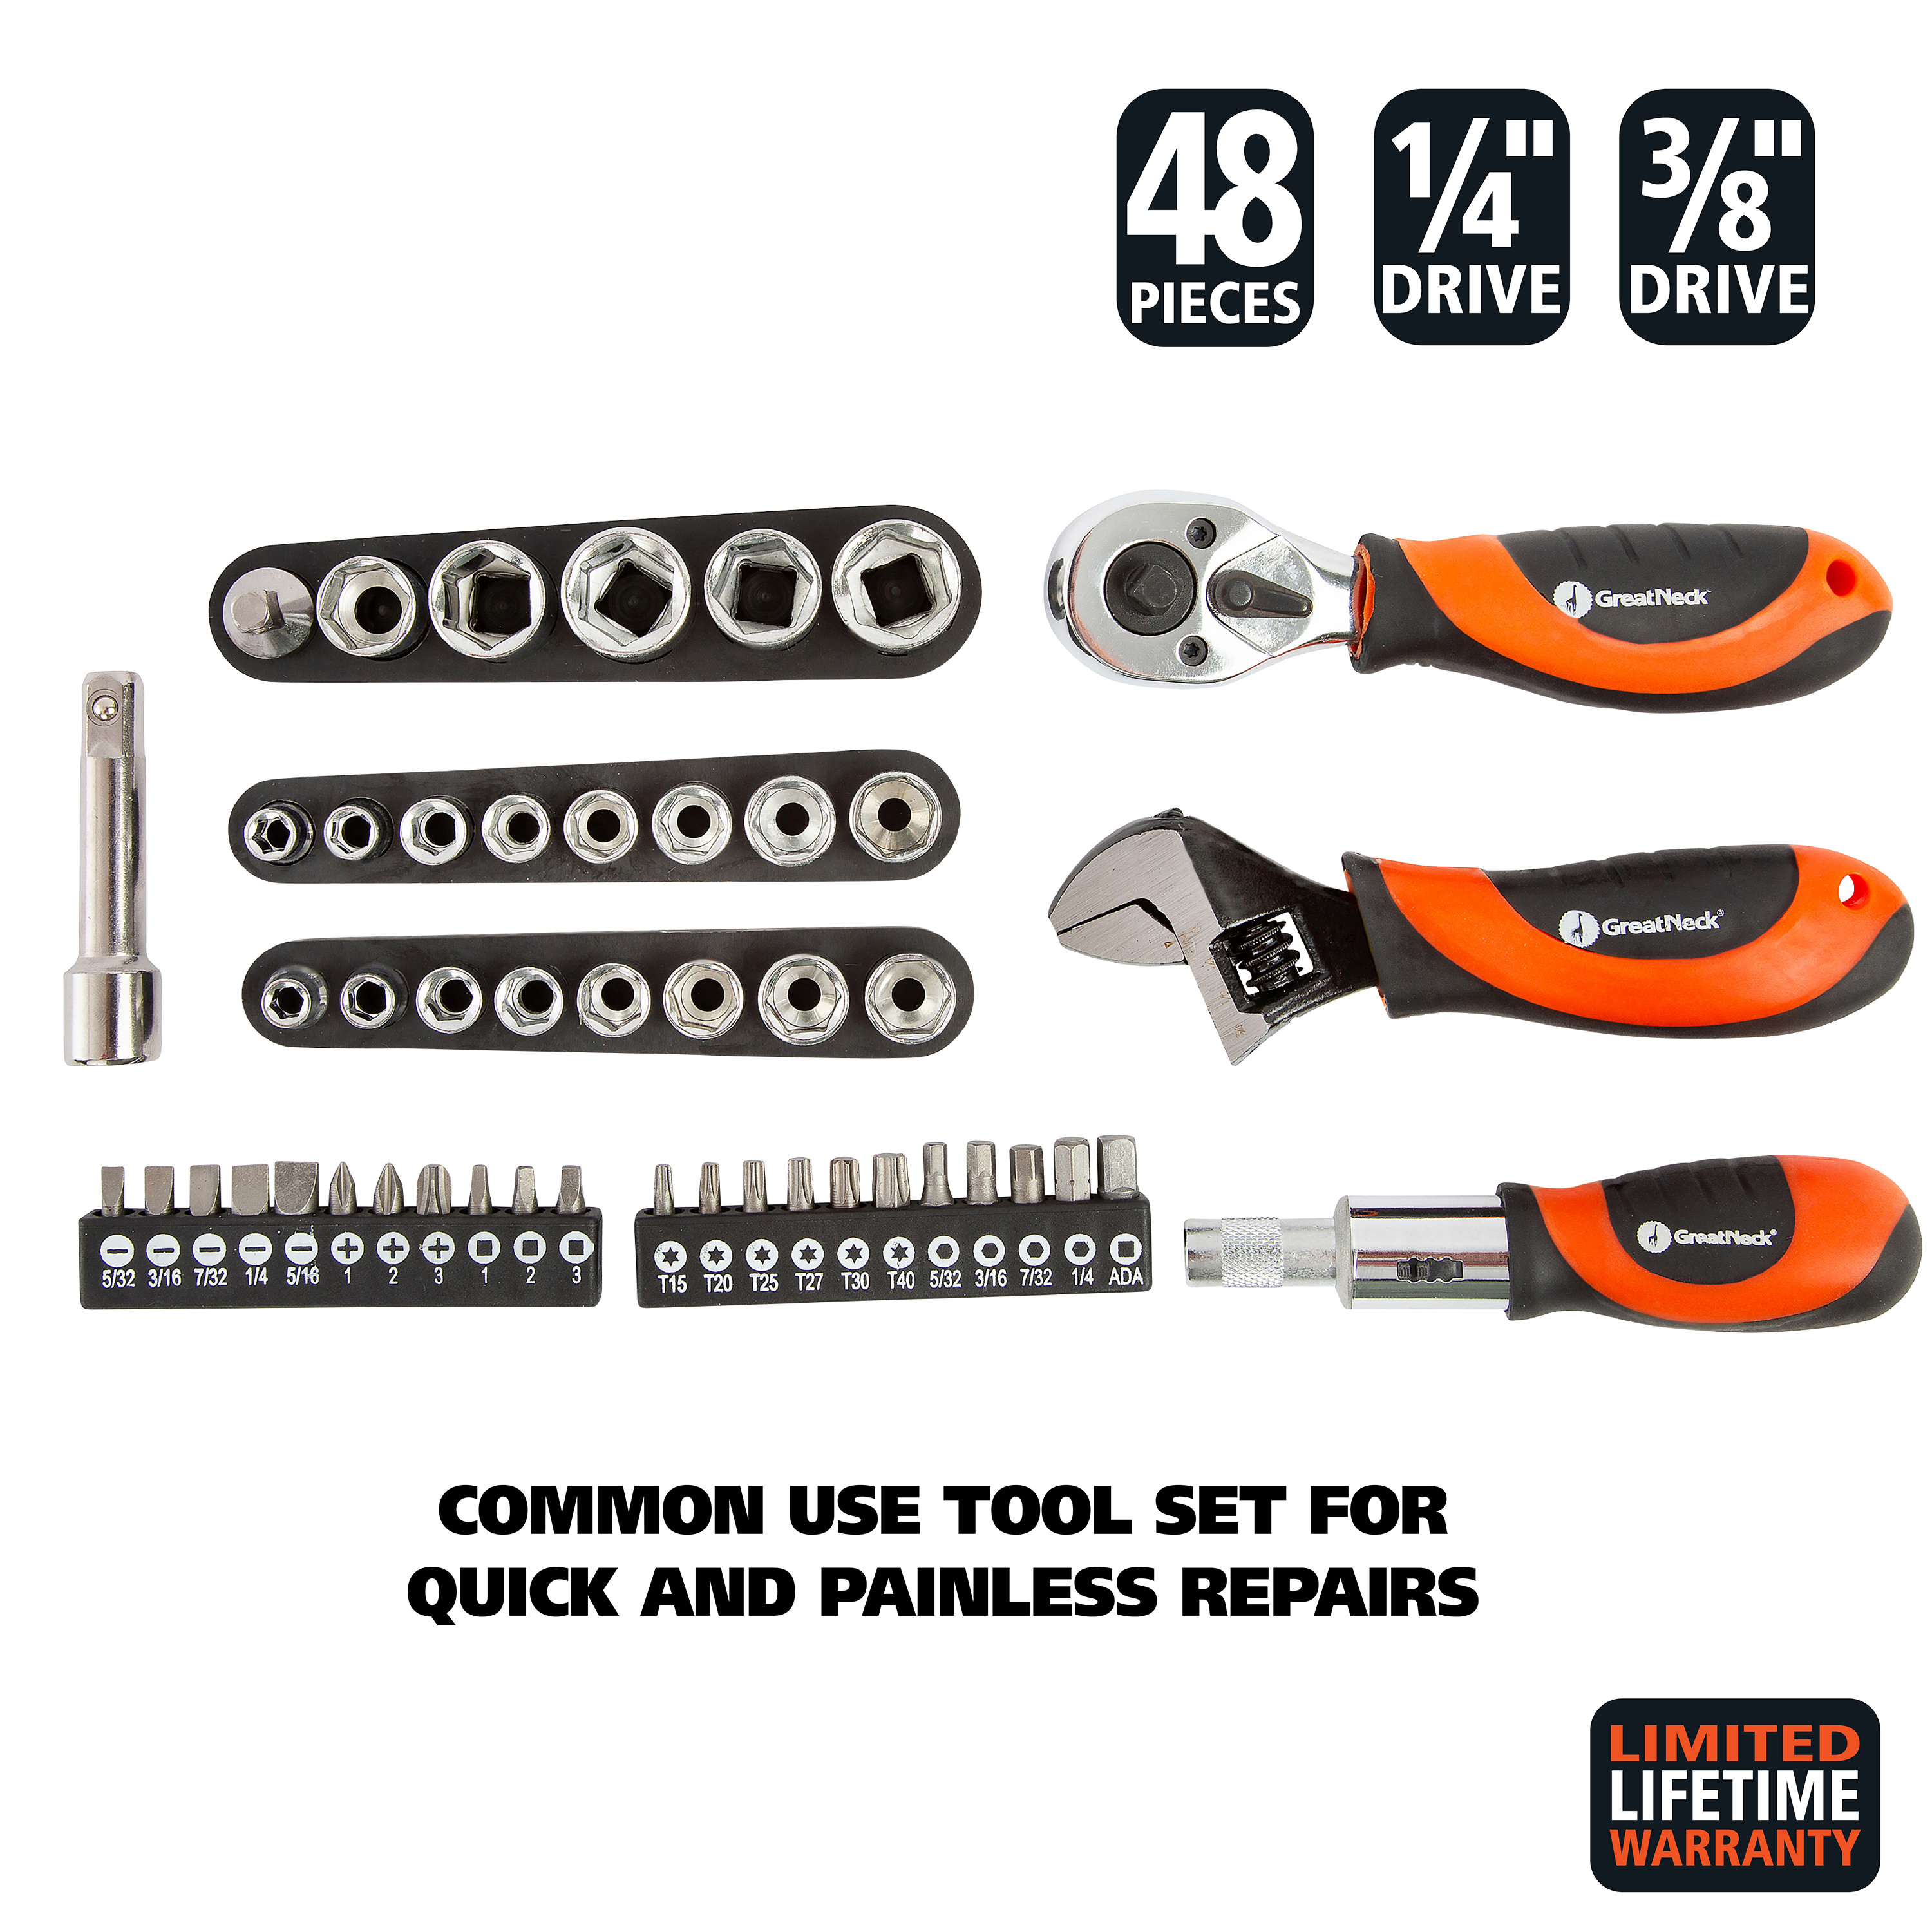 GreatNeck 28045 Multi Drive Stubby Tool Set - image 3 of 11